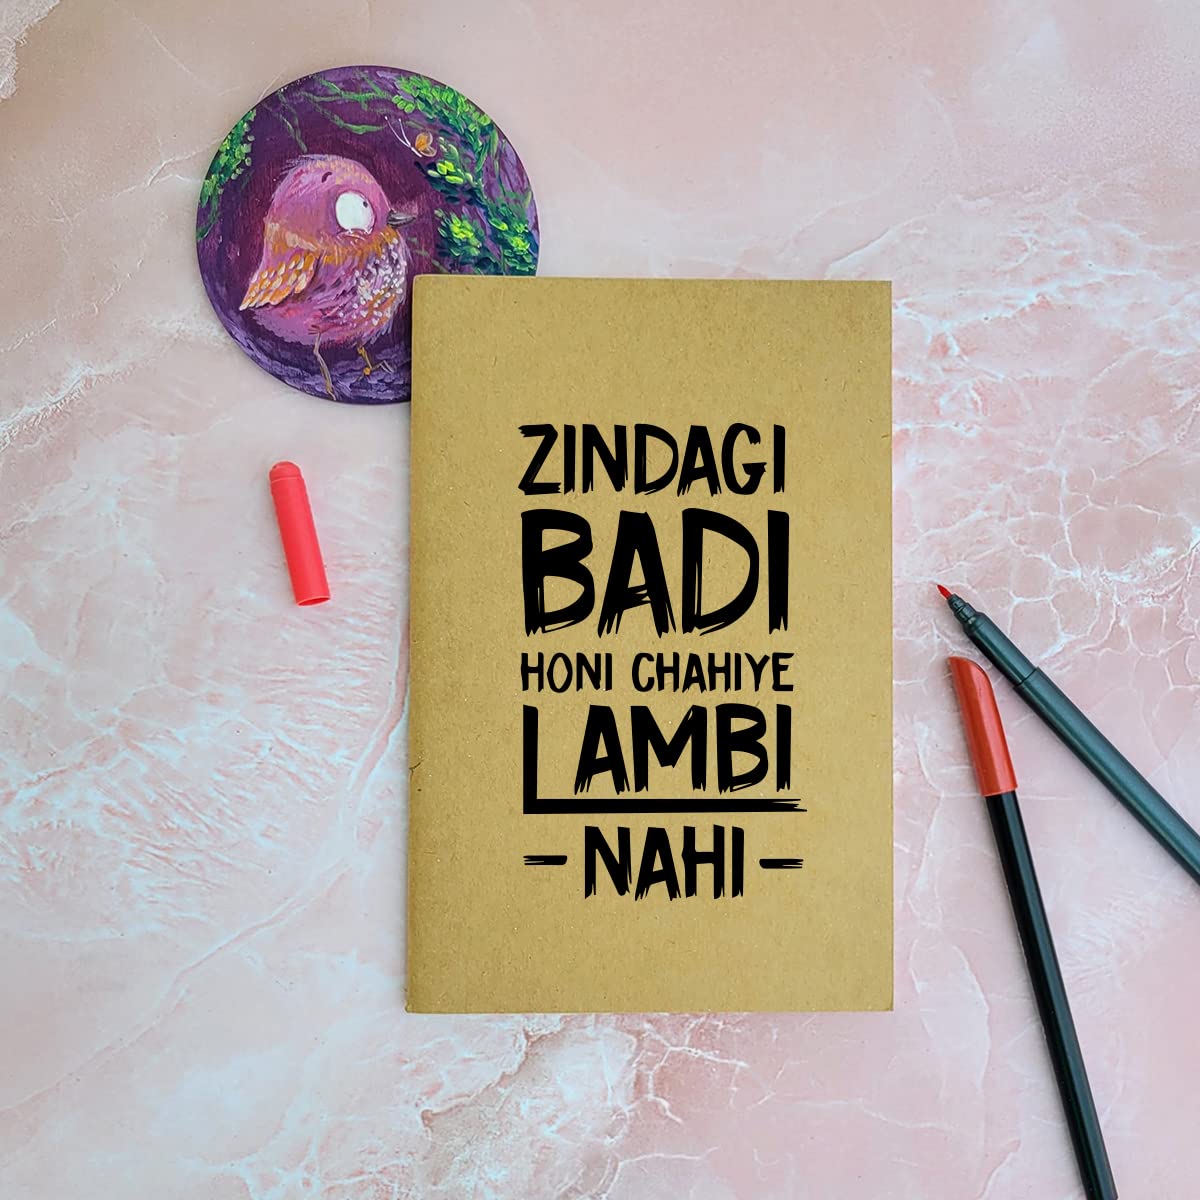 Zindagi Badi Honi Chahiye - Brown A5 Doodle Notebook - Kraft Cover Notebook Handmade - Natural Shade Pages 120 GSM - Funny Quotes & Quirky, Funky designs